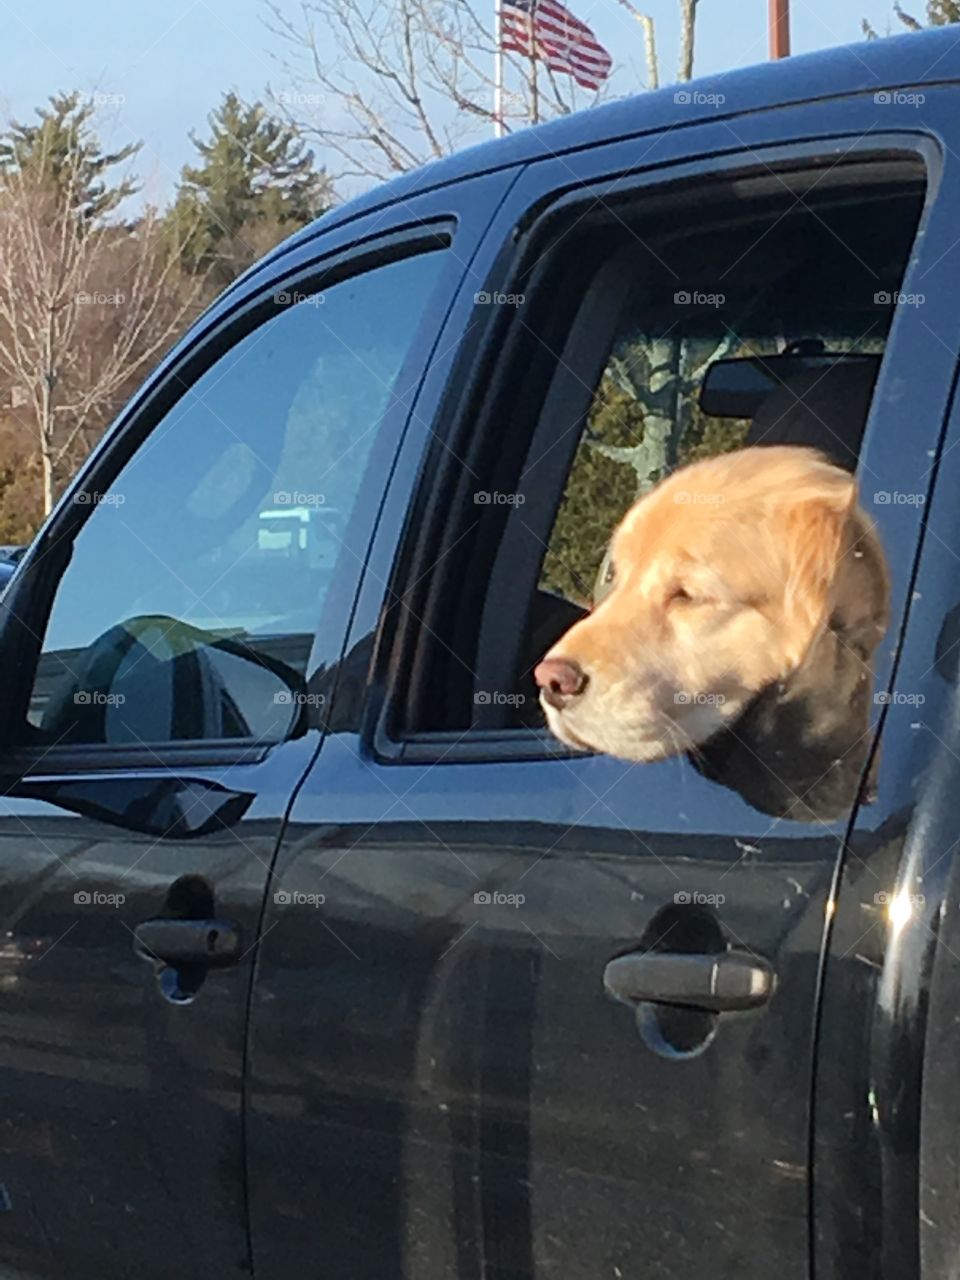 Dog Patiently Waiting In Truck For Owner

Tan dog awaiting owners return to truck from grocery shopping. Hopefully there will be treats for this dog who is in the back seat of the black truck waiting for the fun ride home. We all know how dogs love to go for rides! 🐶